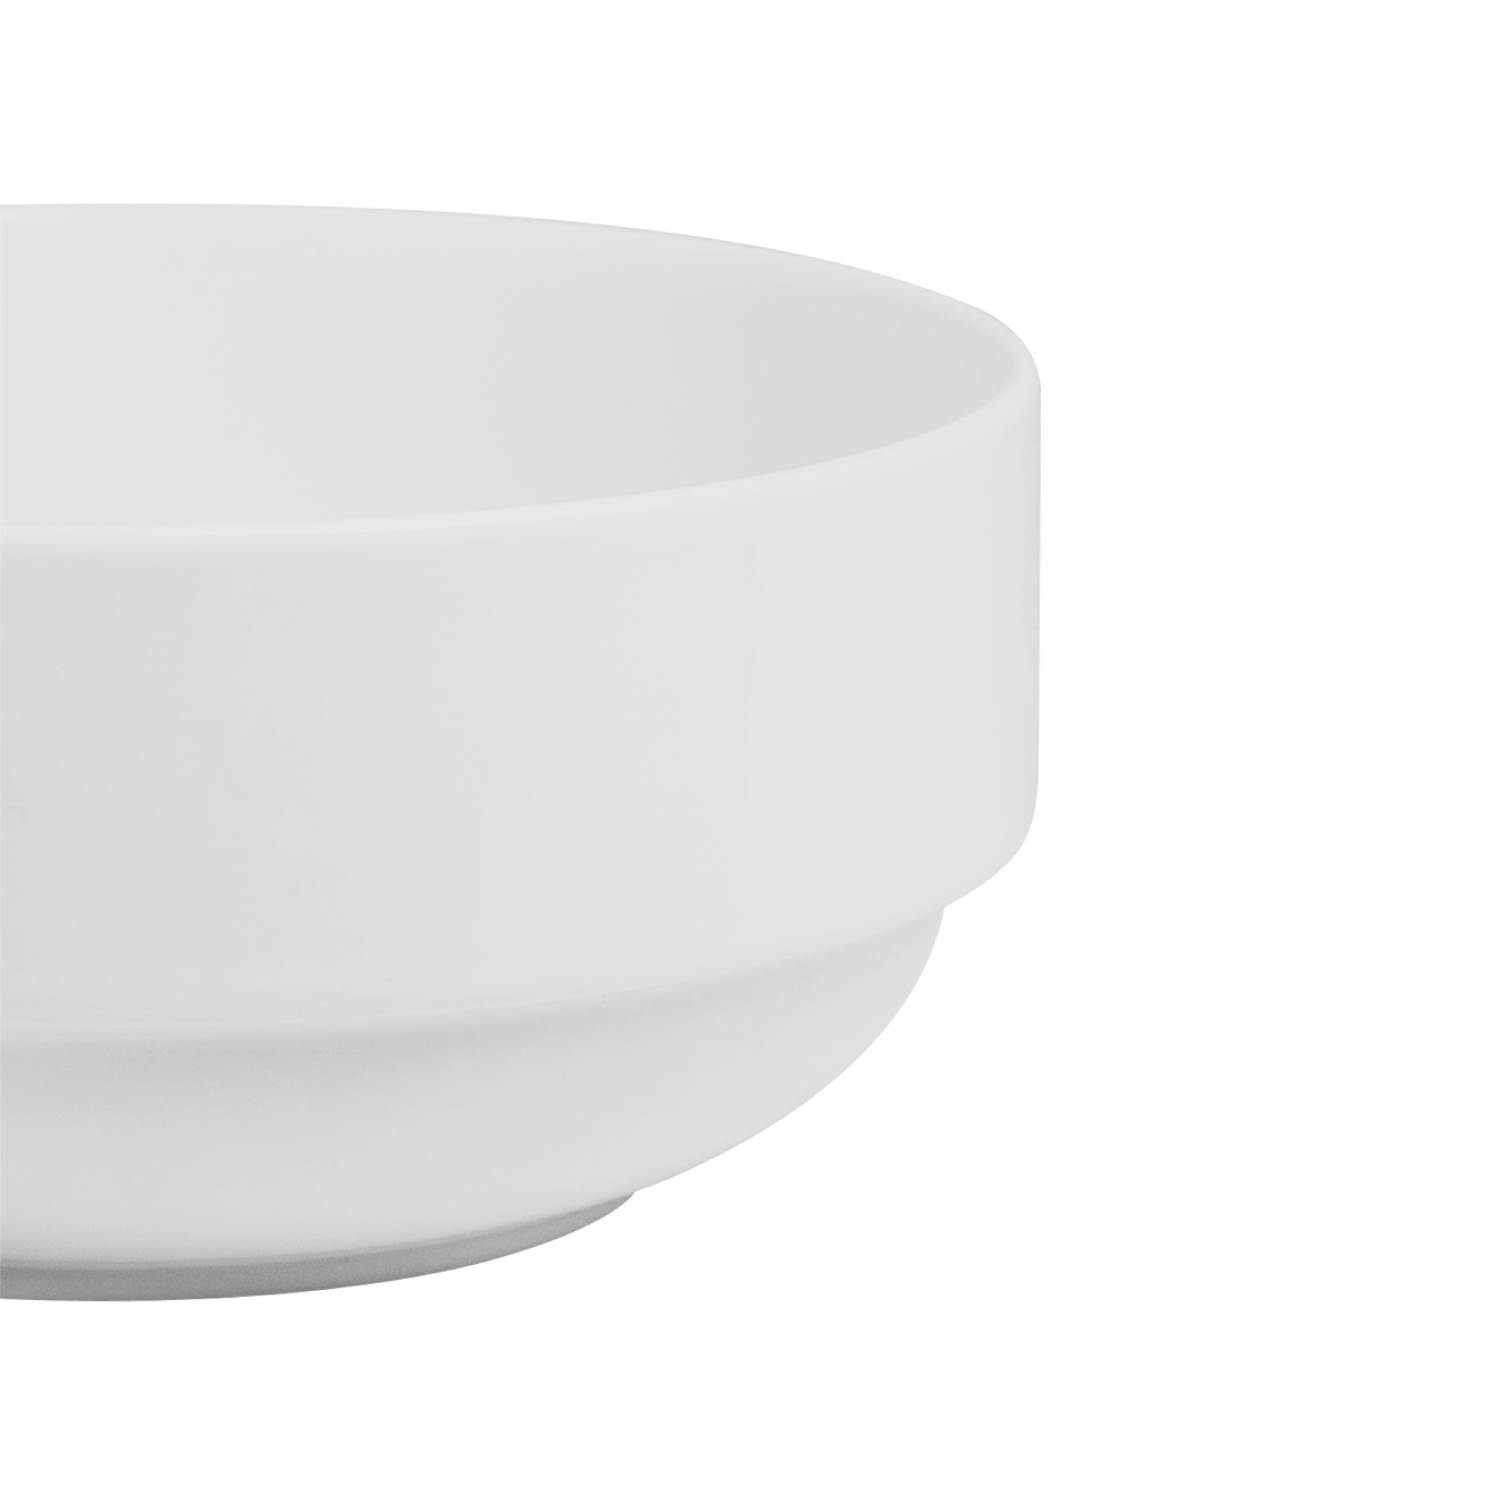 Baralee Simple Plus Stackable Bowl